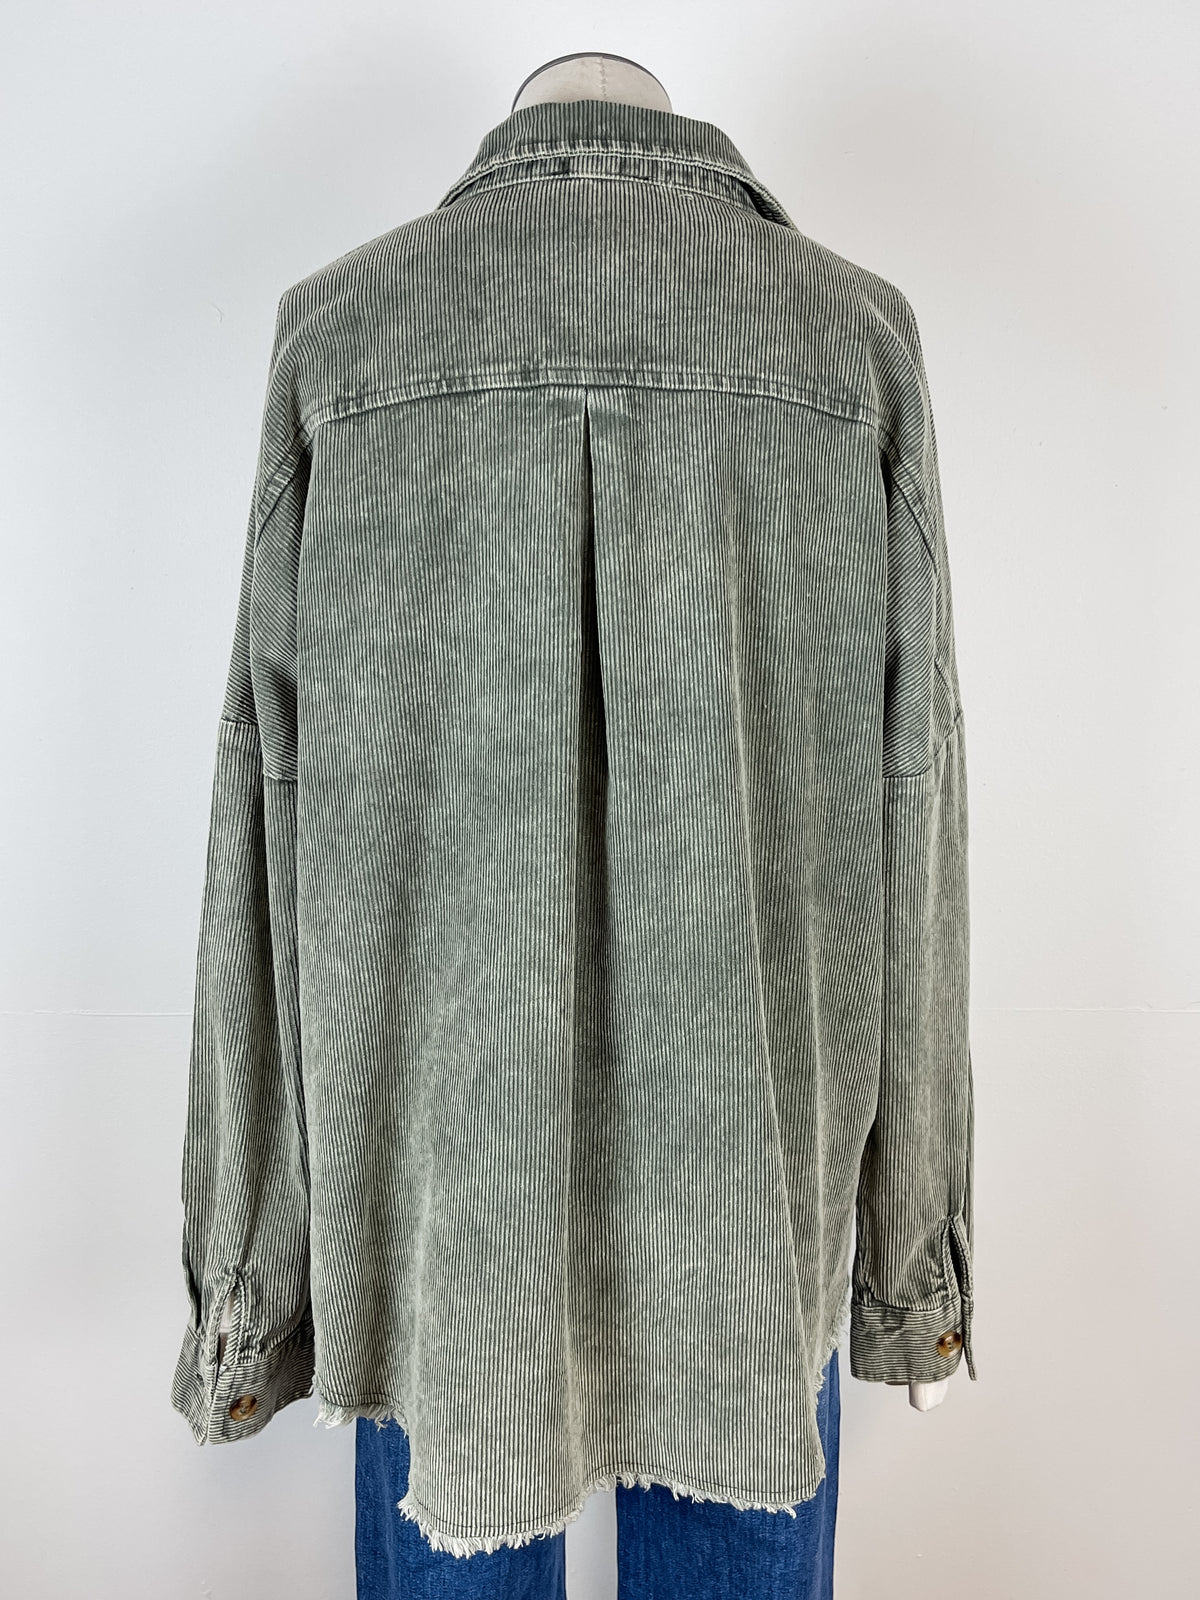 Emily Mineral Wash Corduroy Jacket in Green